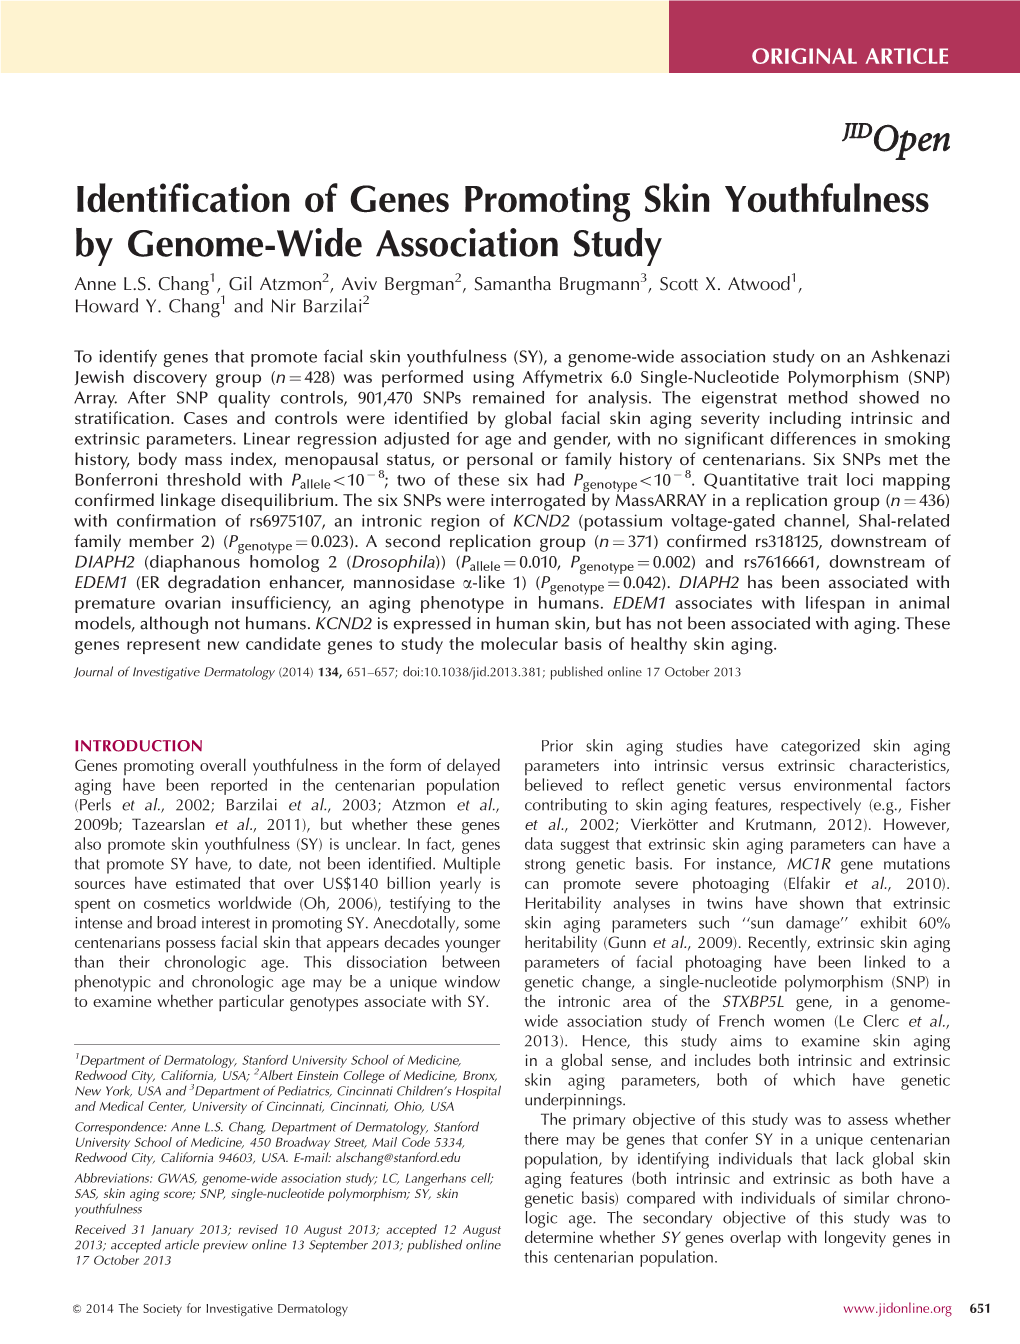 Identification of Genes Promoting Skin Youthfulness by Genome-Wide Association Study